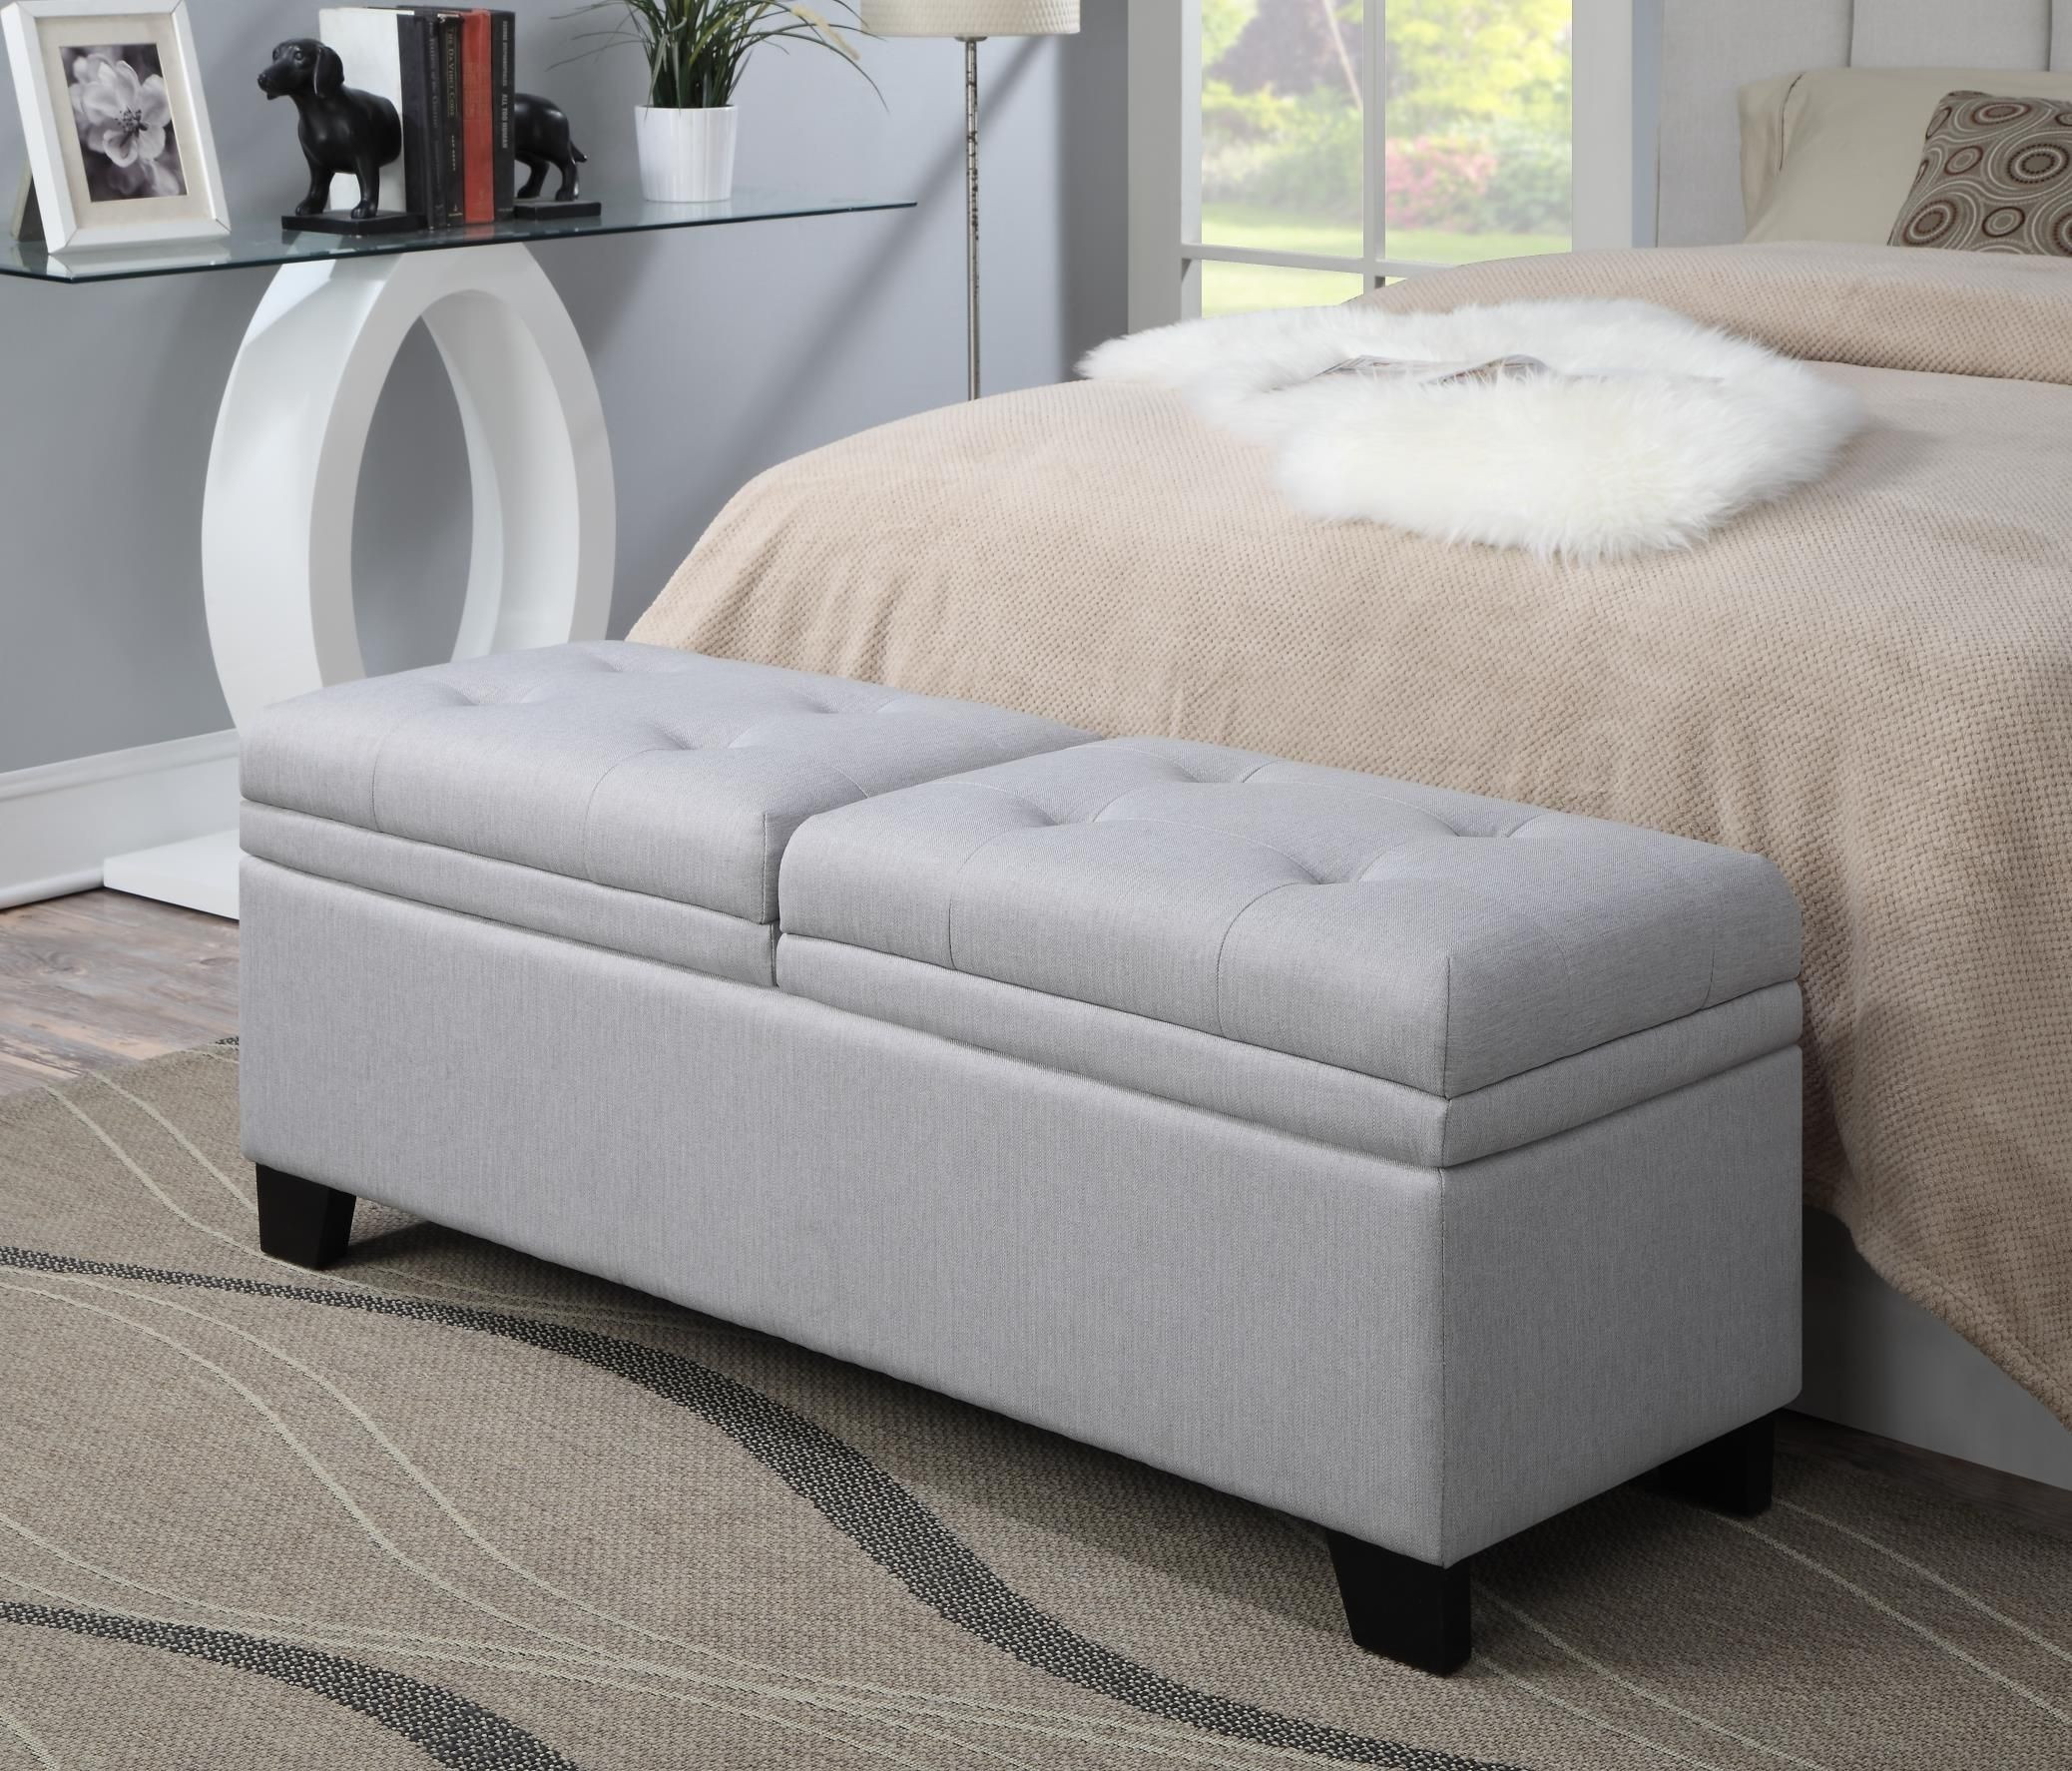 Bed Bench Storage
 Trespass Marmor Upholstered Storage Bed Bench from Pulaski